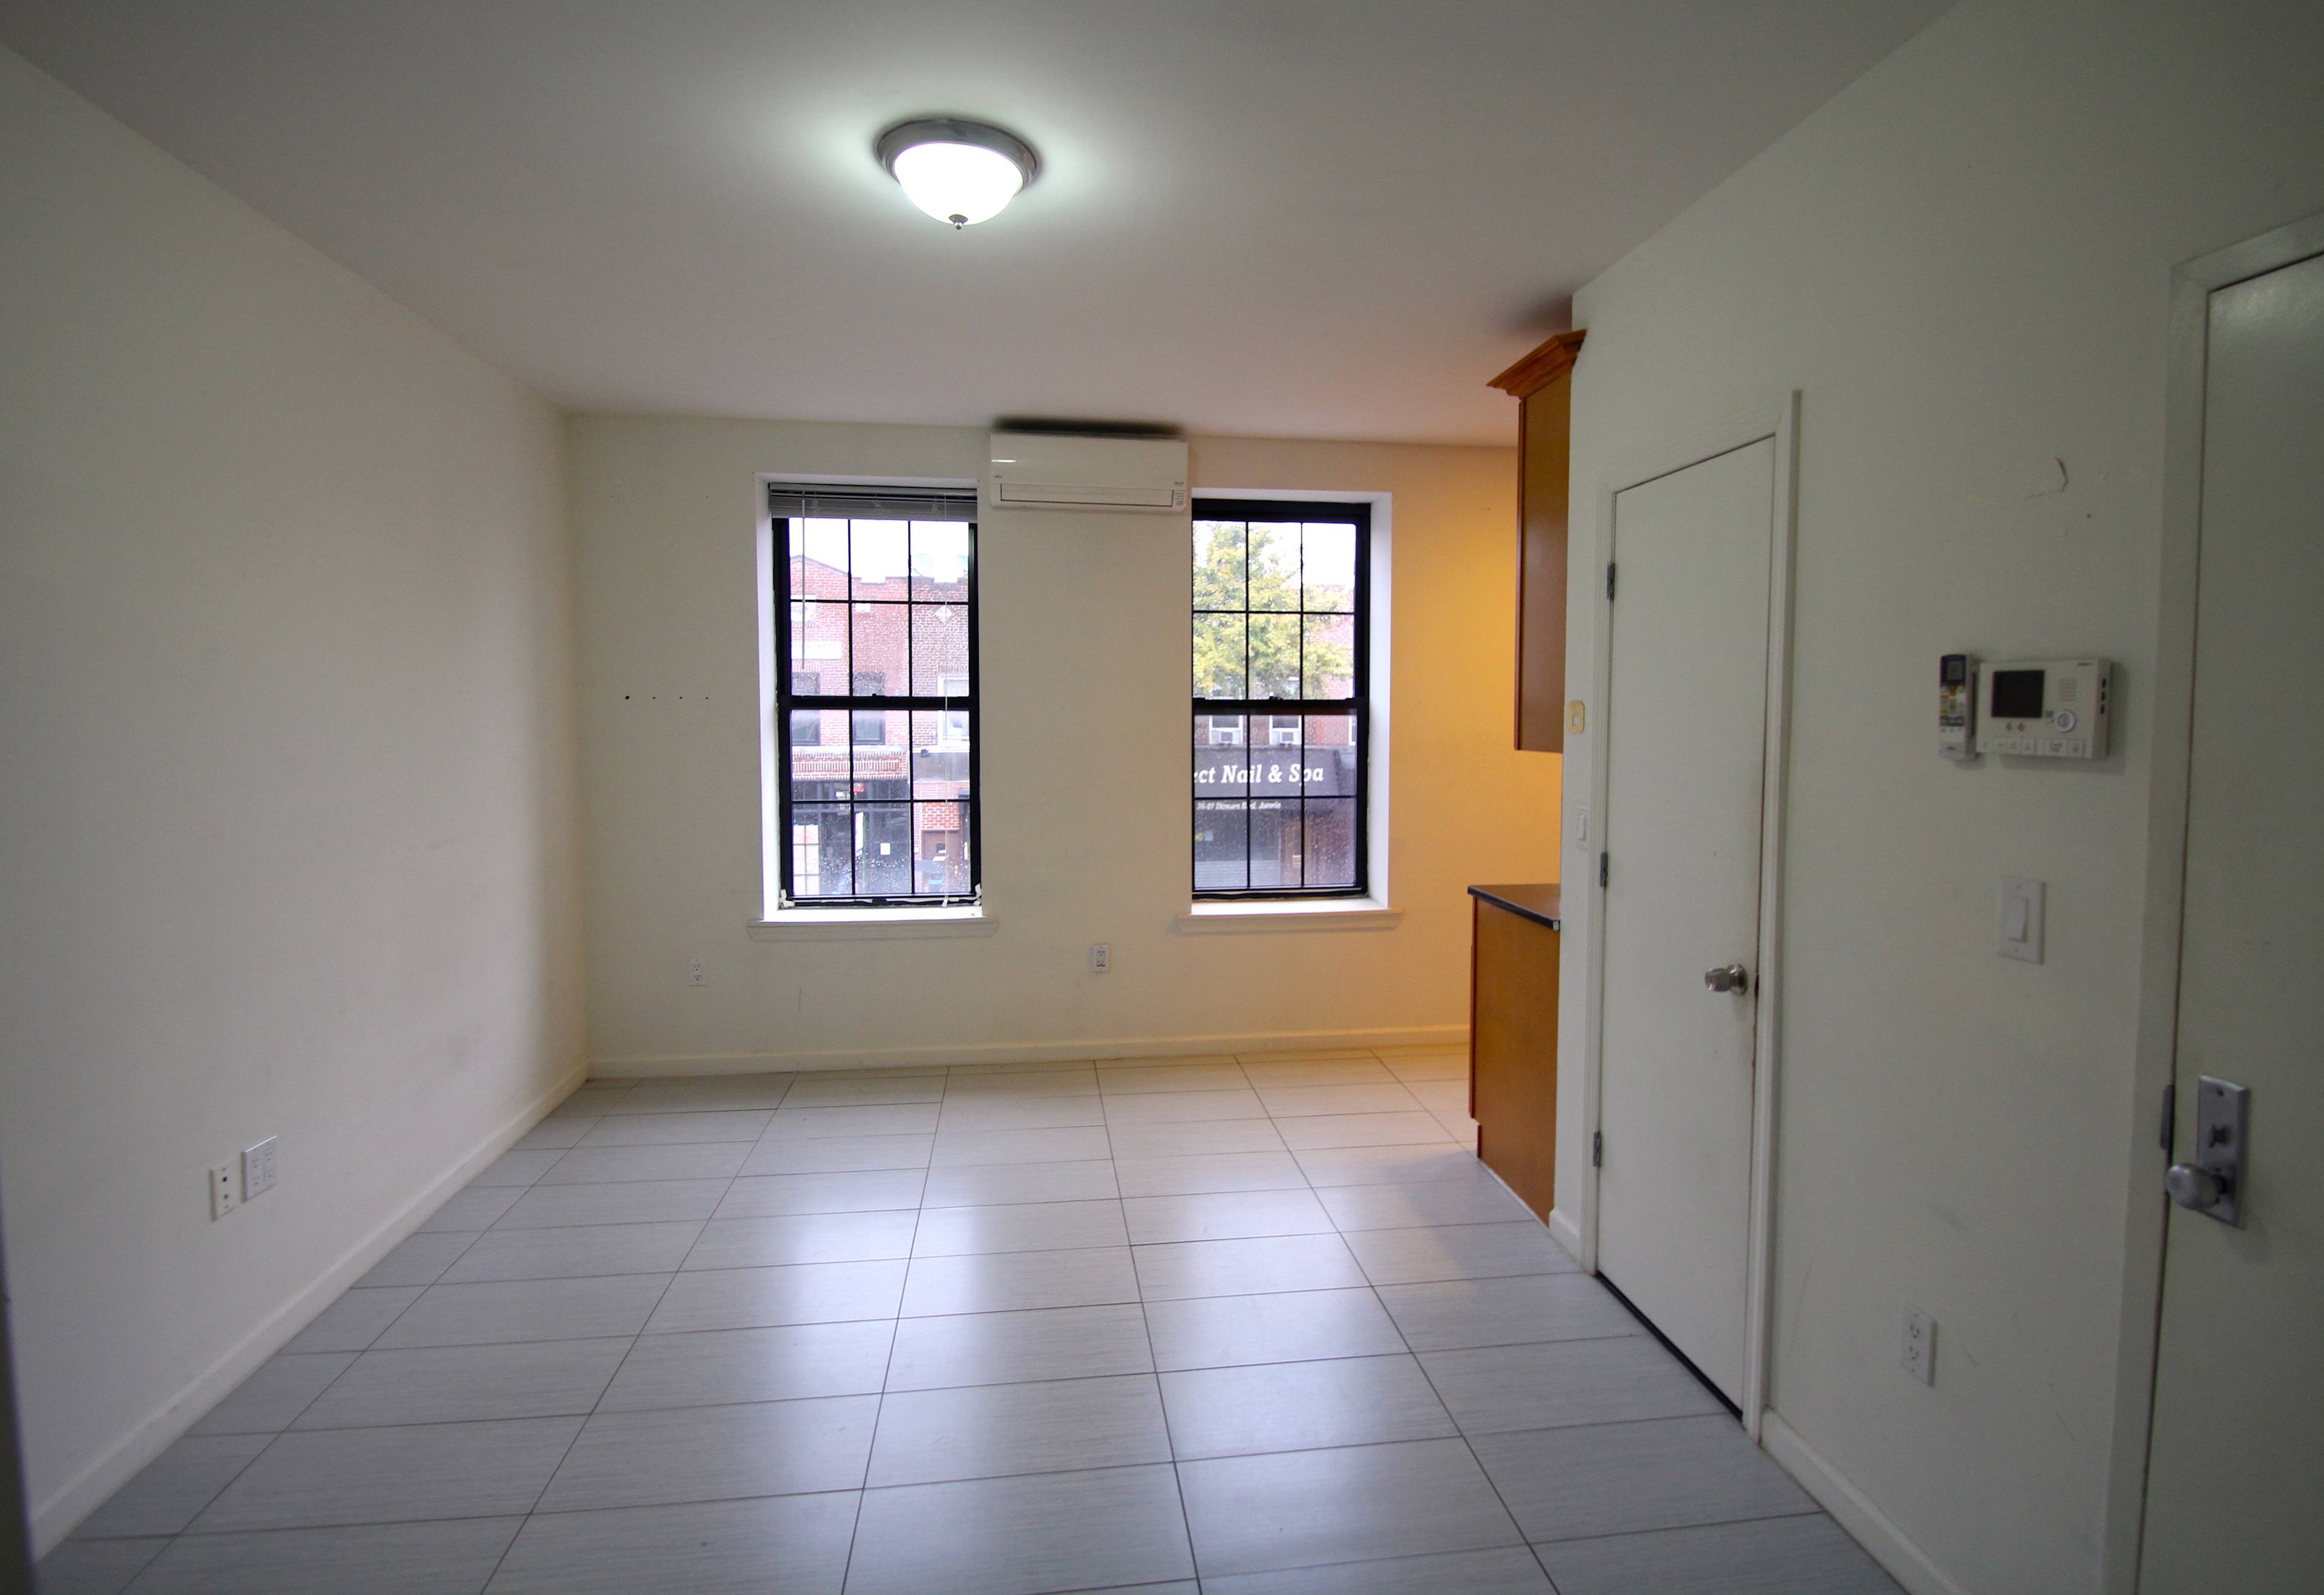 Astoria/Ditmars Blvd: NO FEE! Renovated 1 Bedroom Apartment for Lease